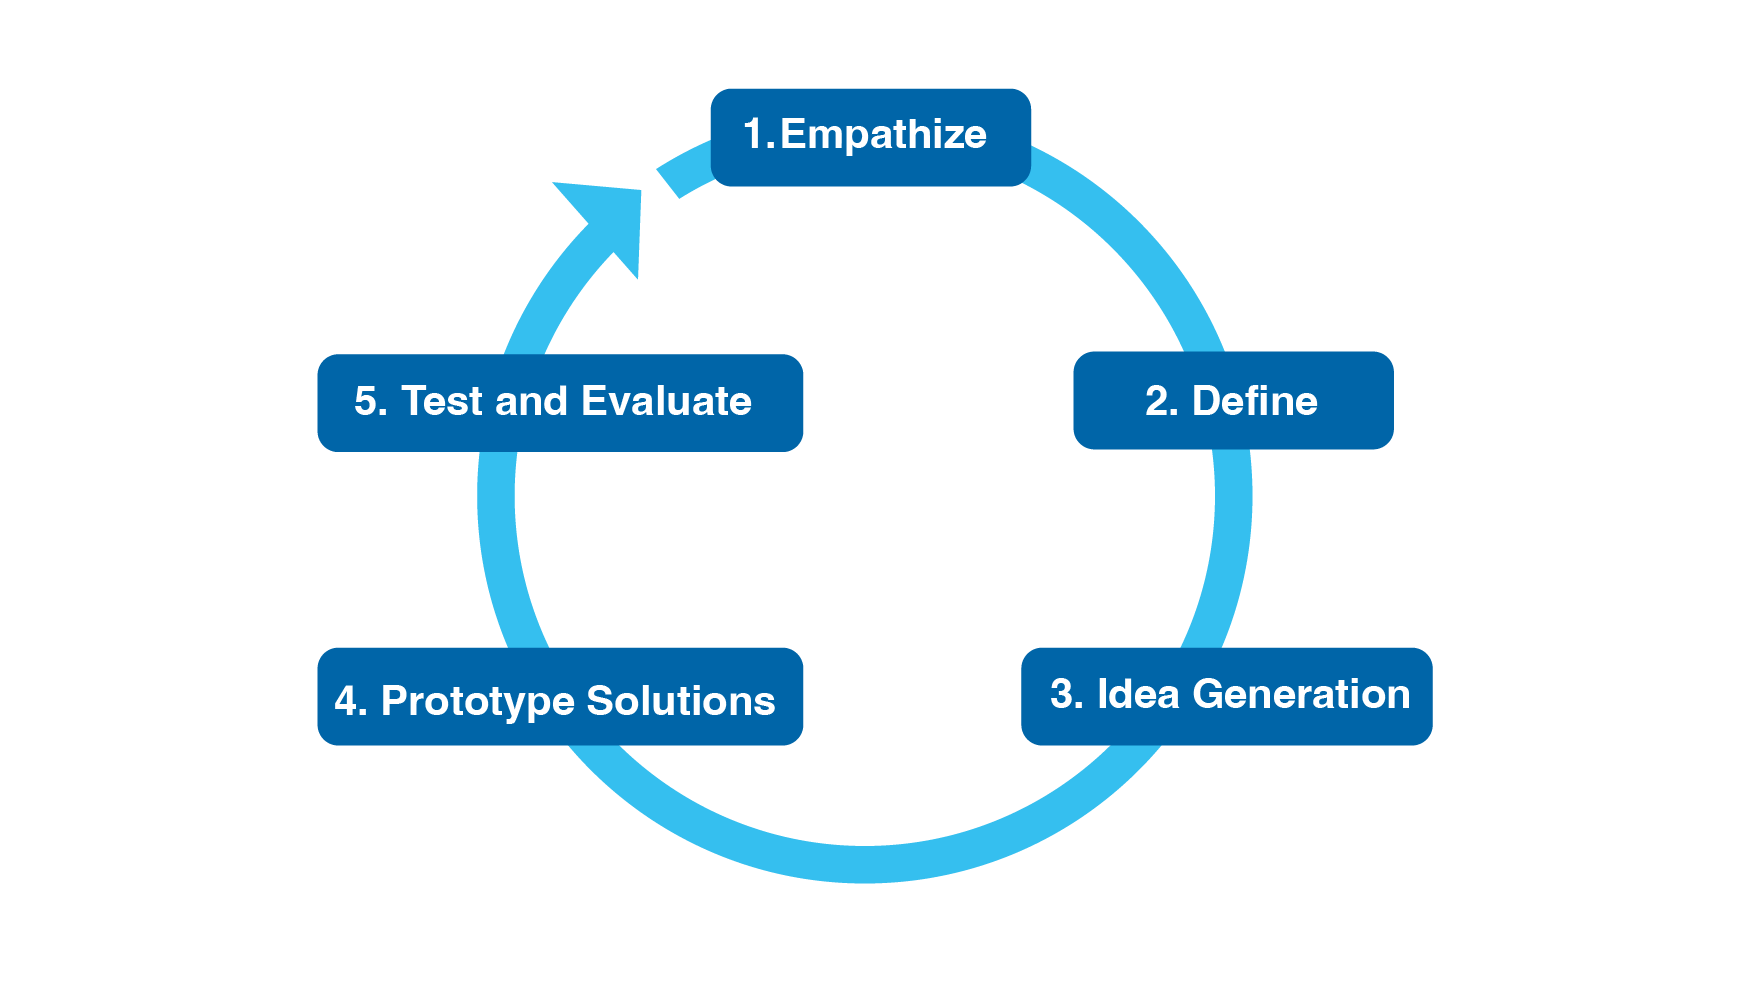 The Nail Framework Cycle: 1. Empathize, 2. Define, 3. Idea Generation, 4. Prototype Solutions, 5. Test and Evaluate